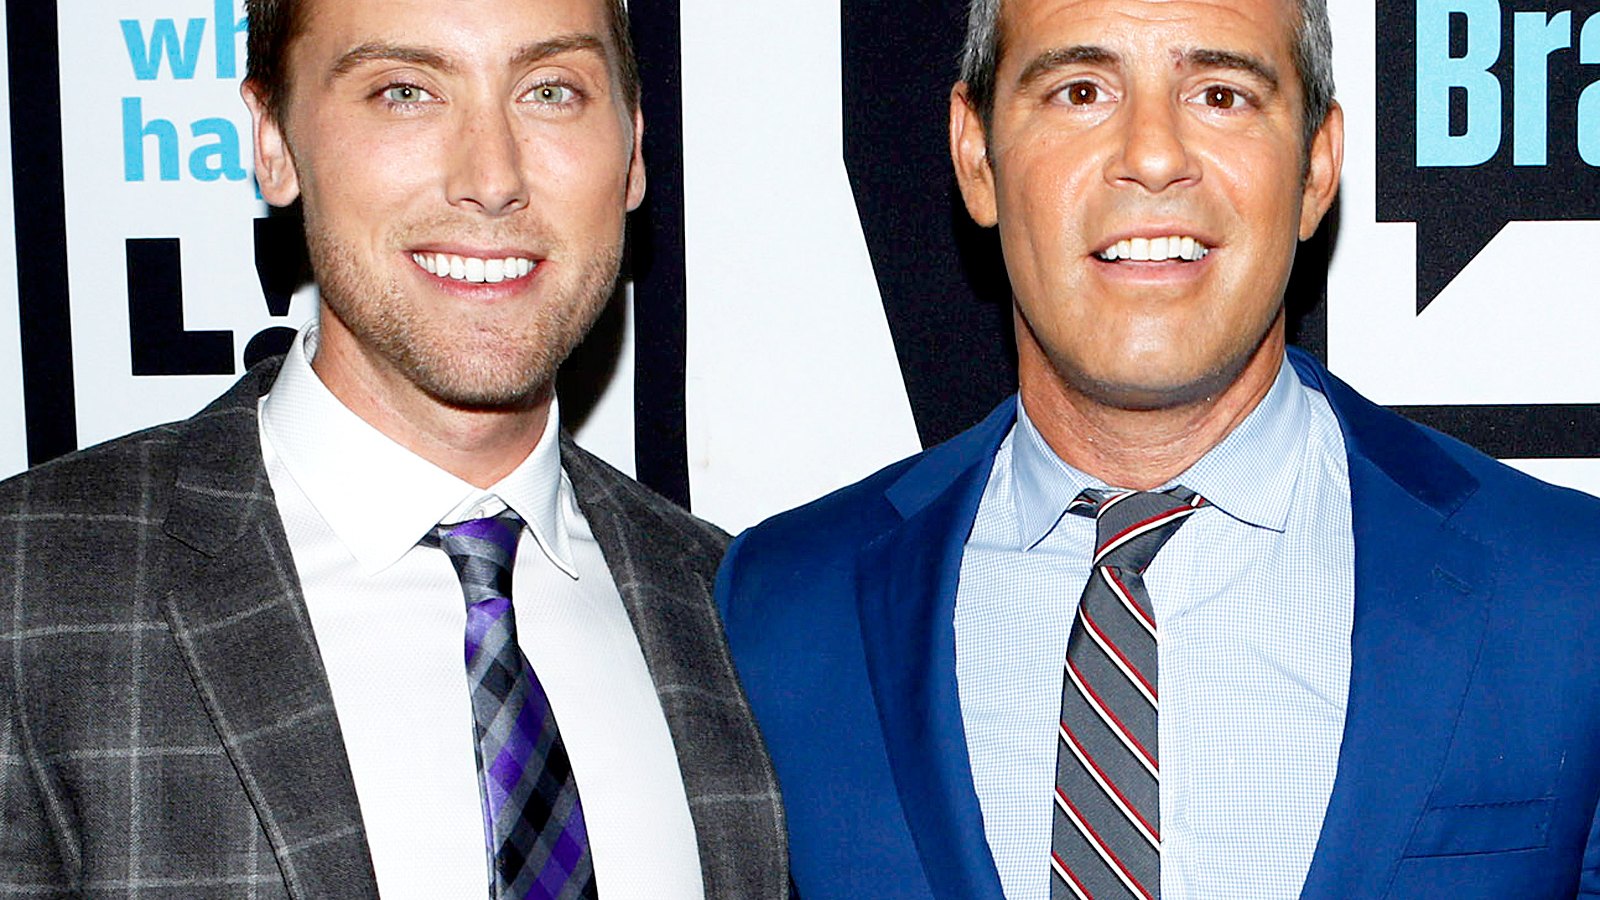 Lance Bass and Andy Cohen